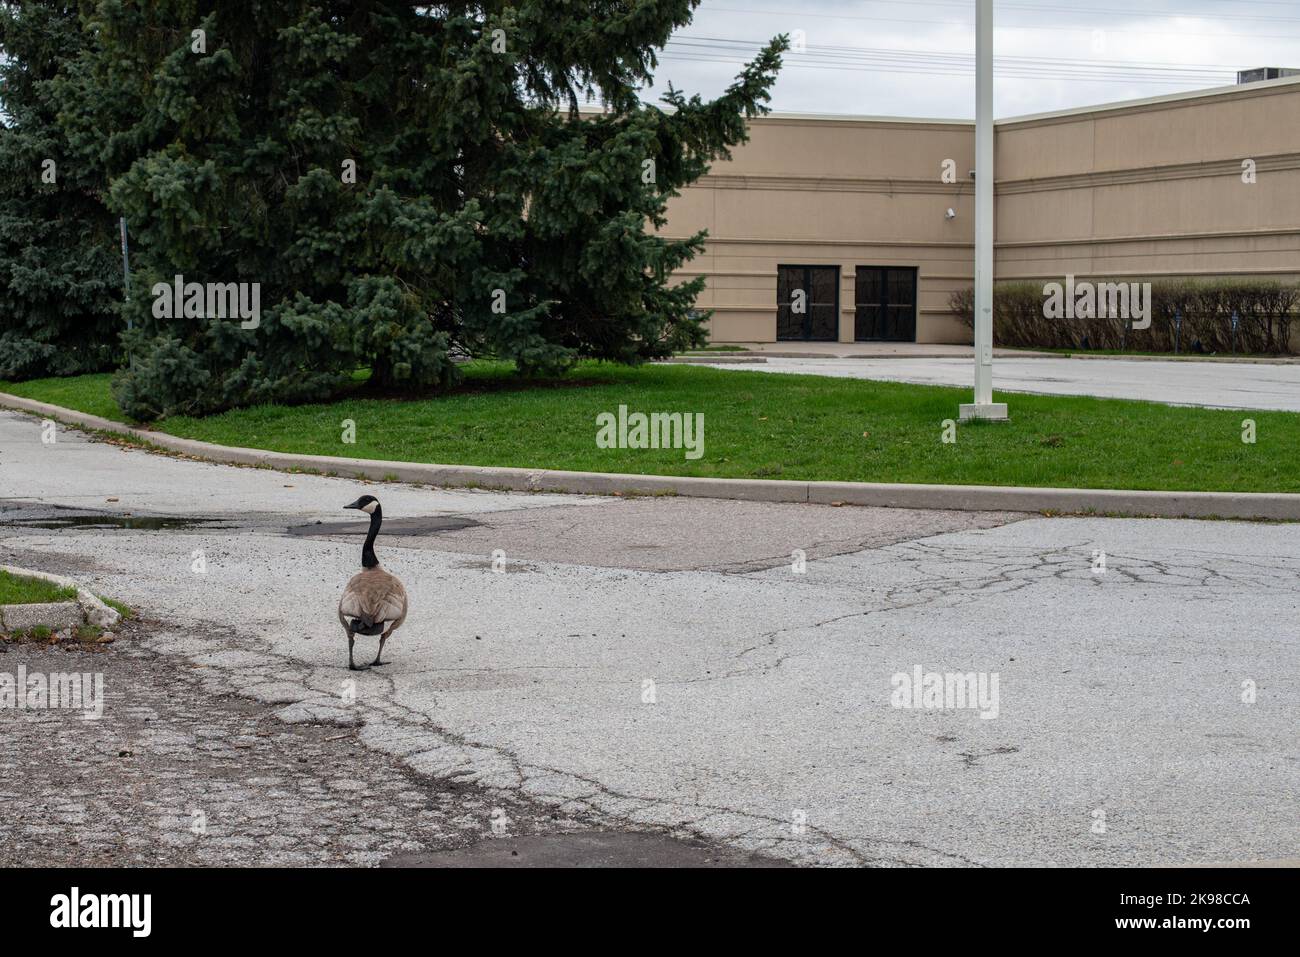 An adult Canada Goose stands in a parking lot of a building with green grass and a concrete parking lot. The large bird has brown, black, and white Stock Photo